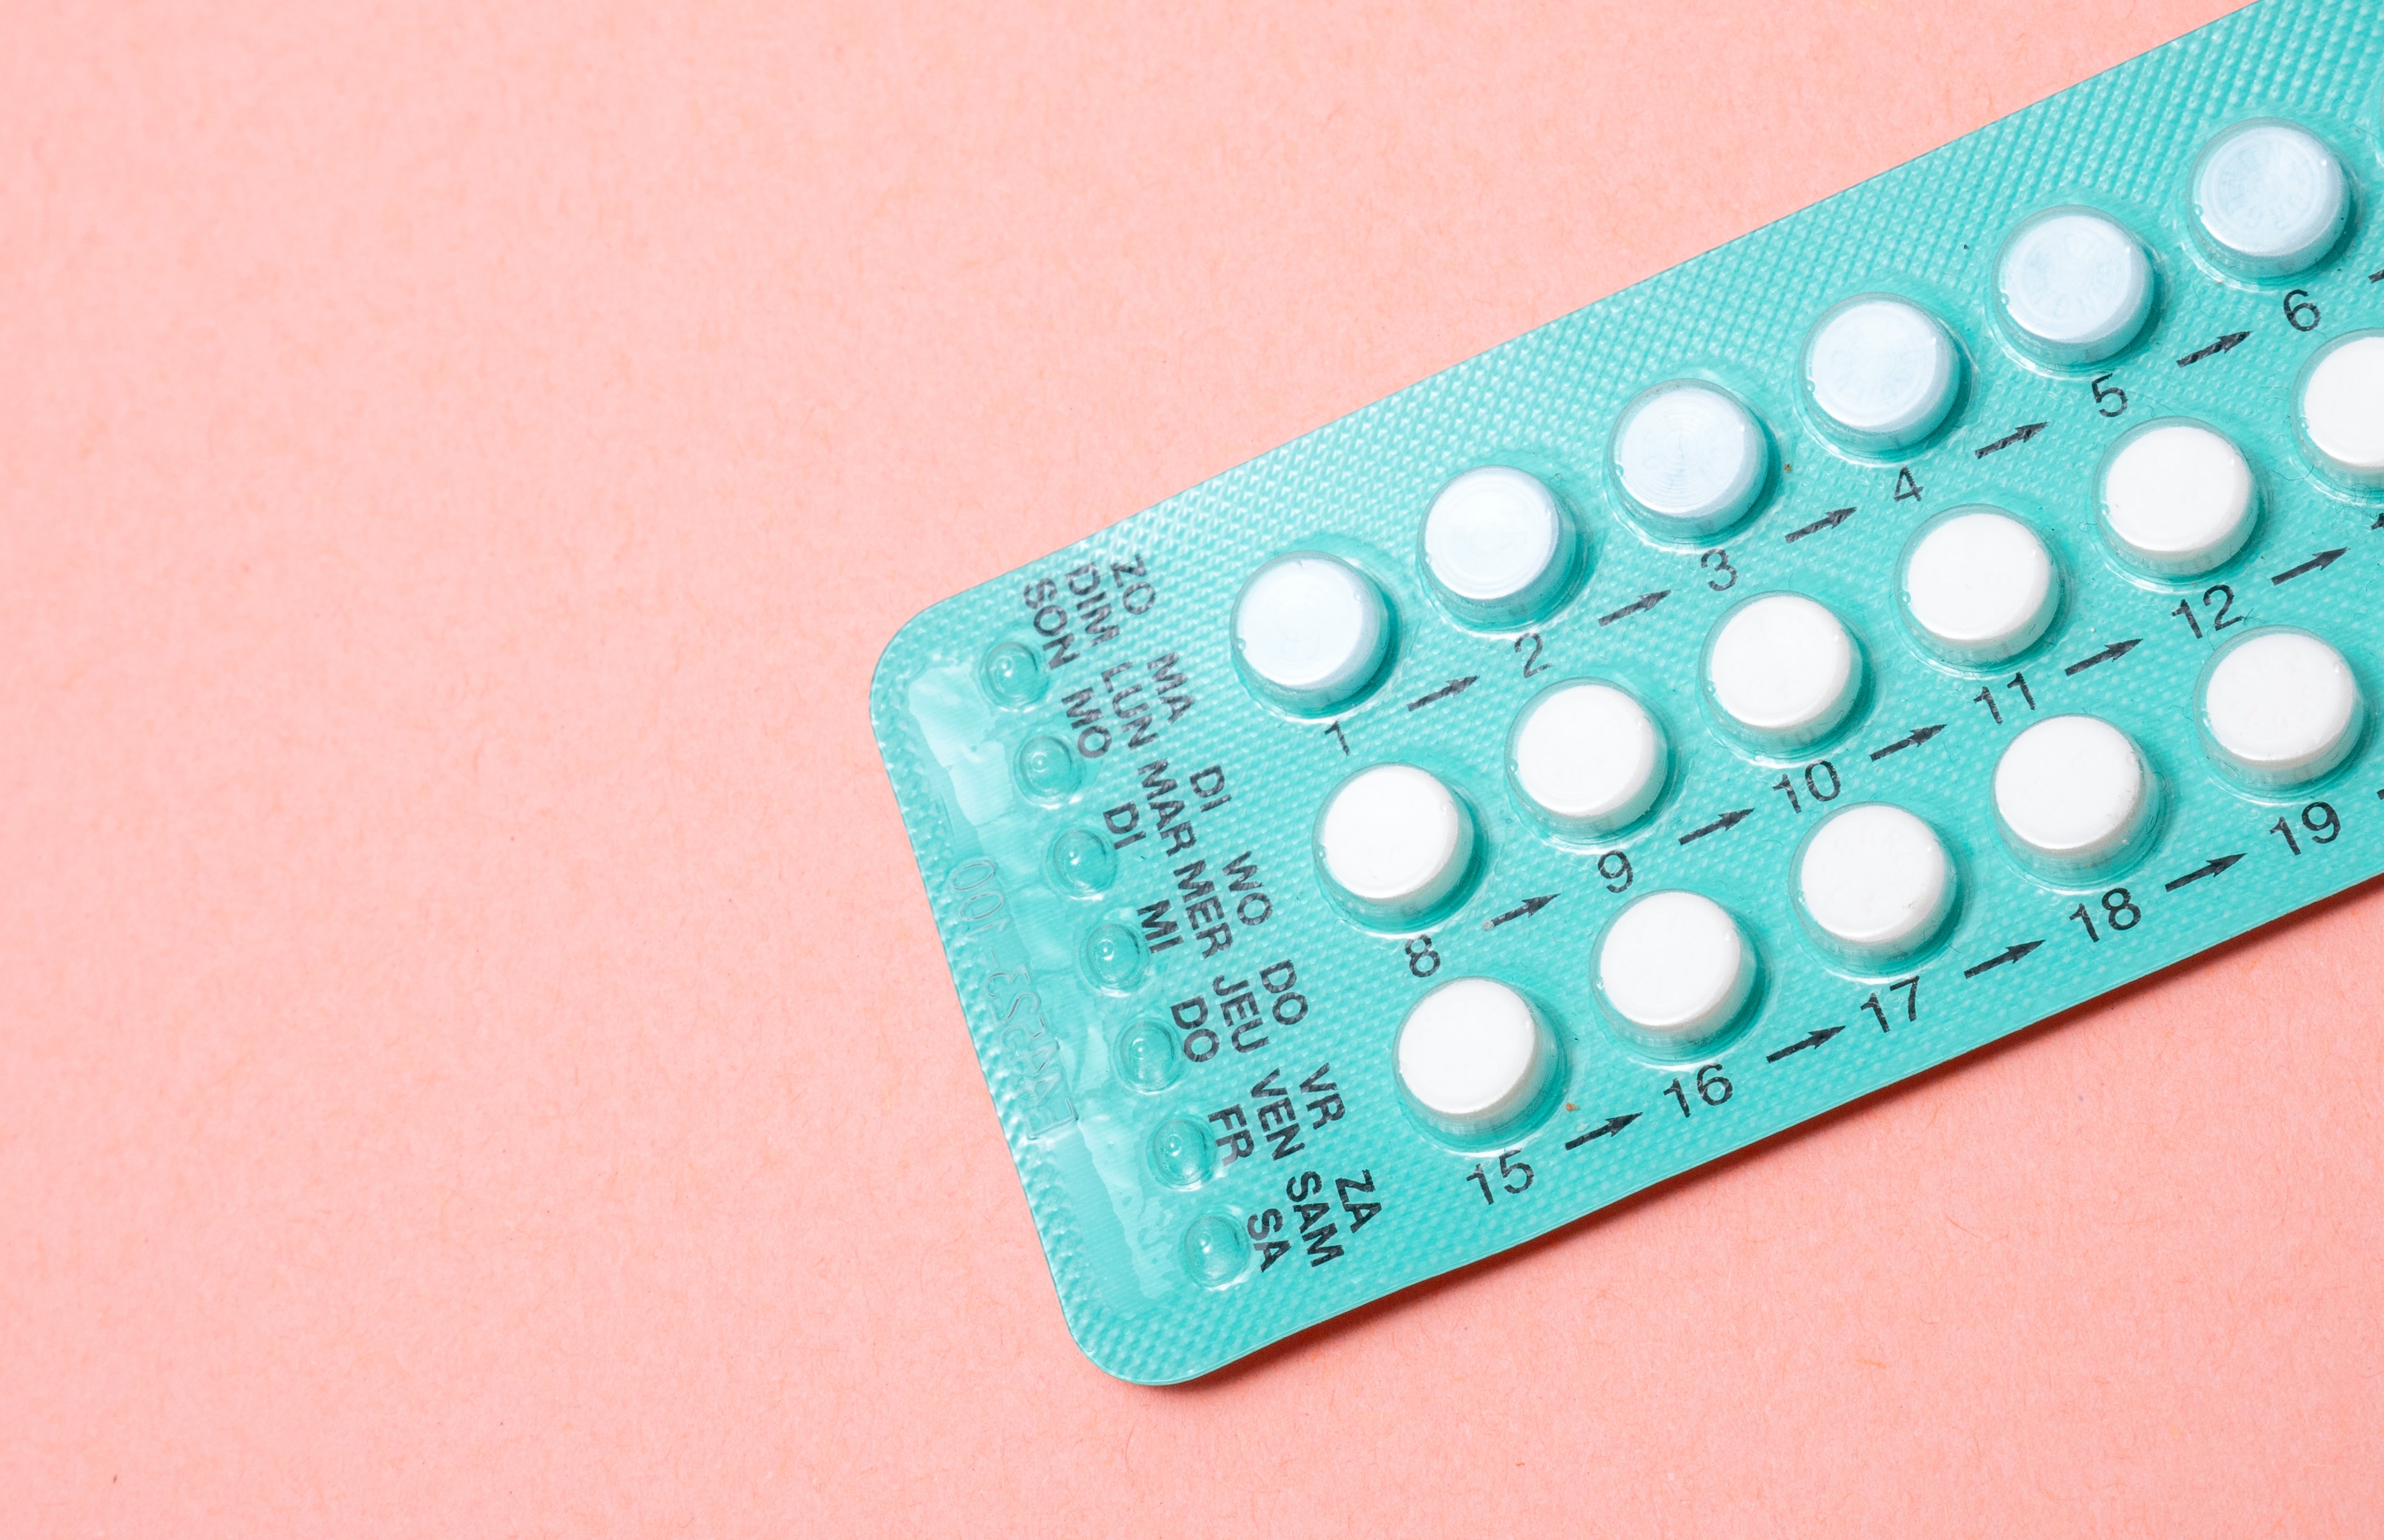 Myths and facts about the Pill | IPPF